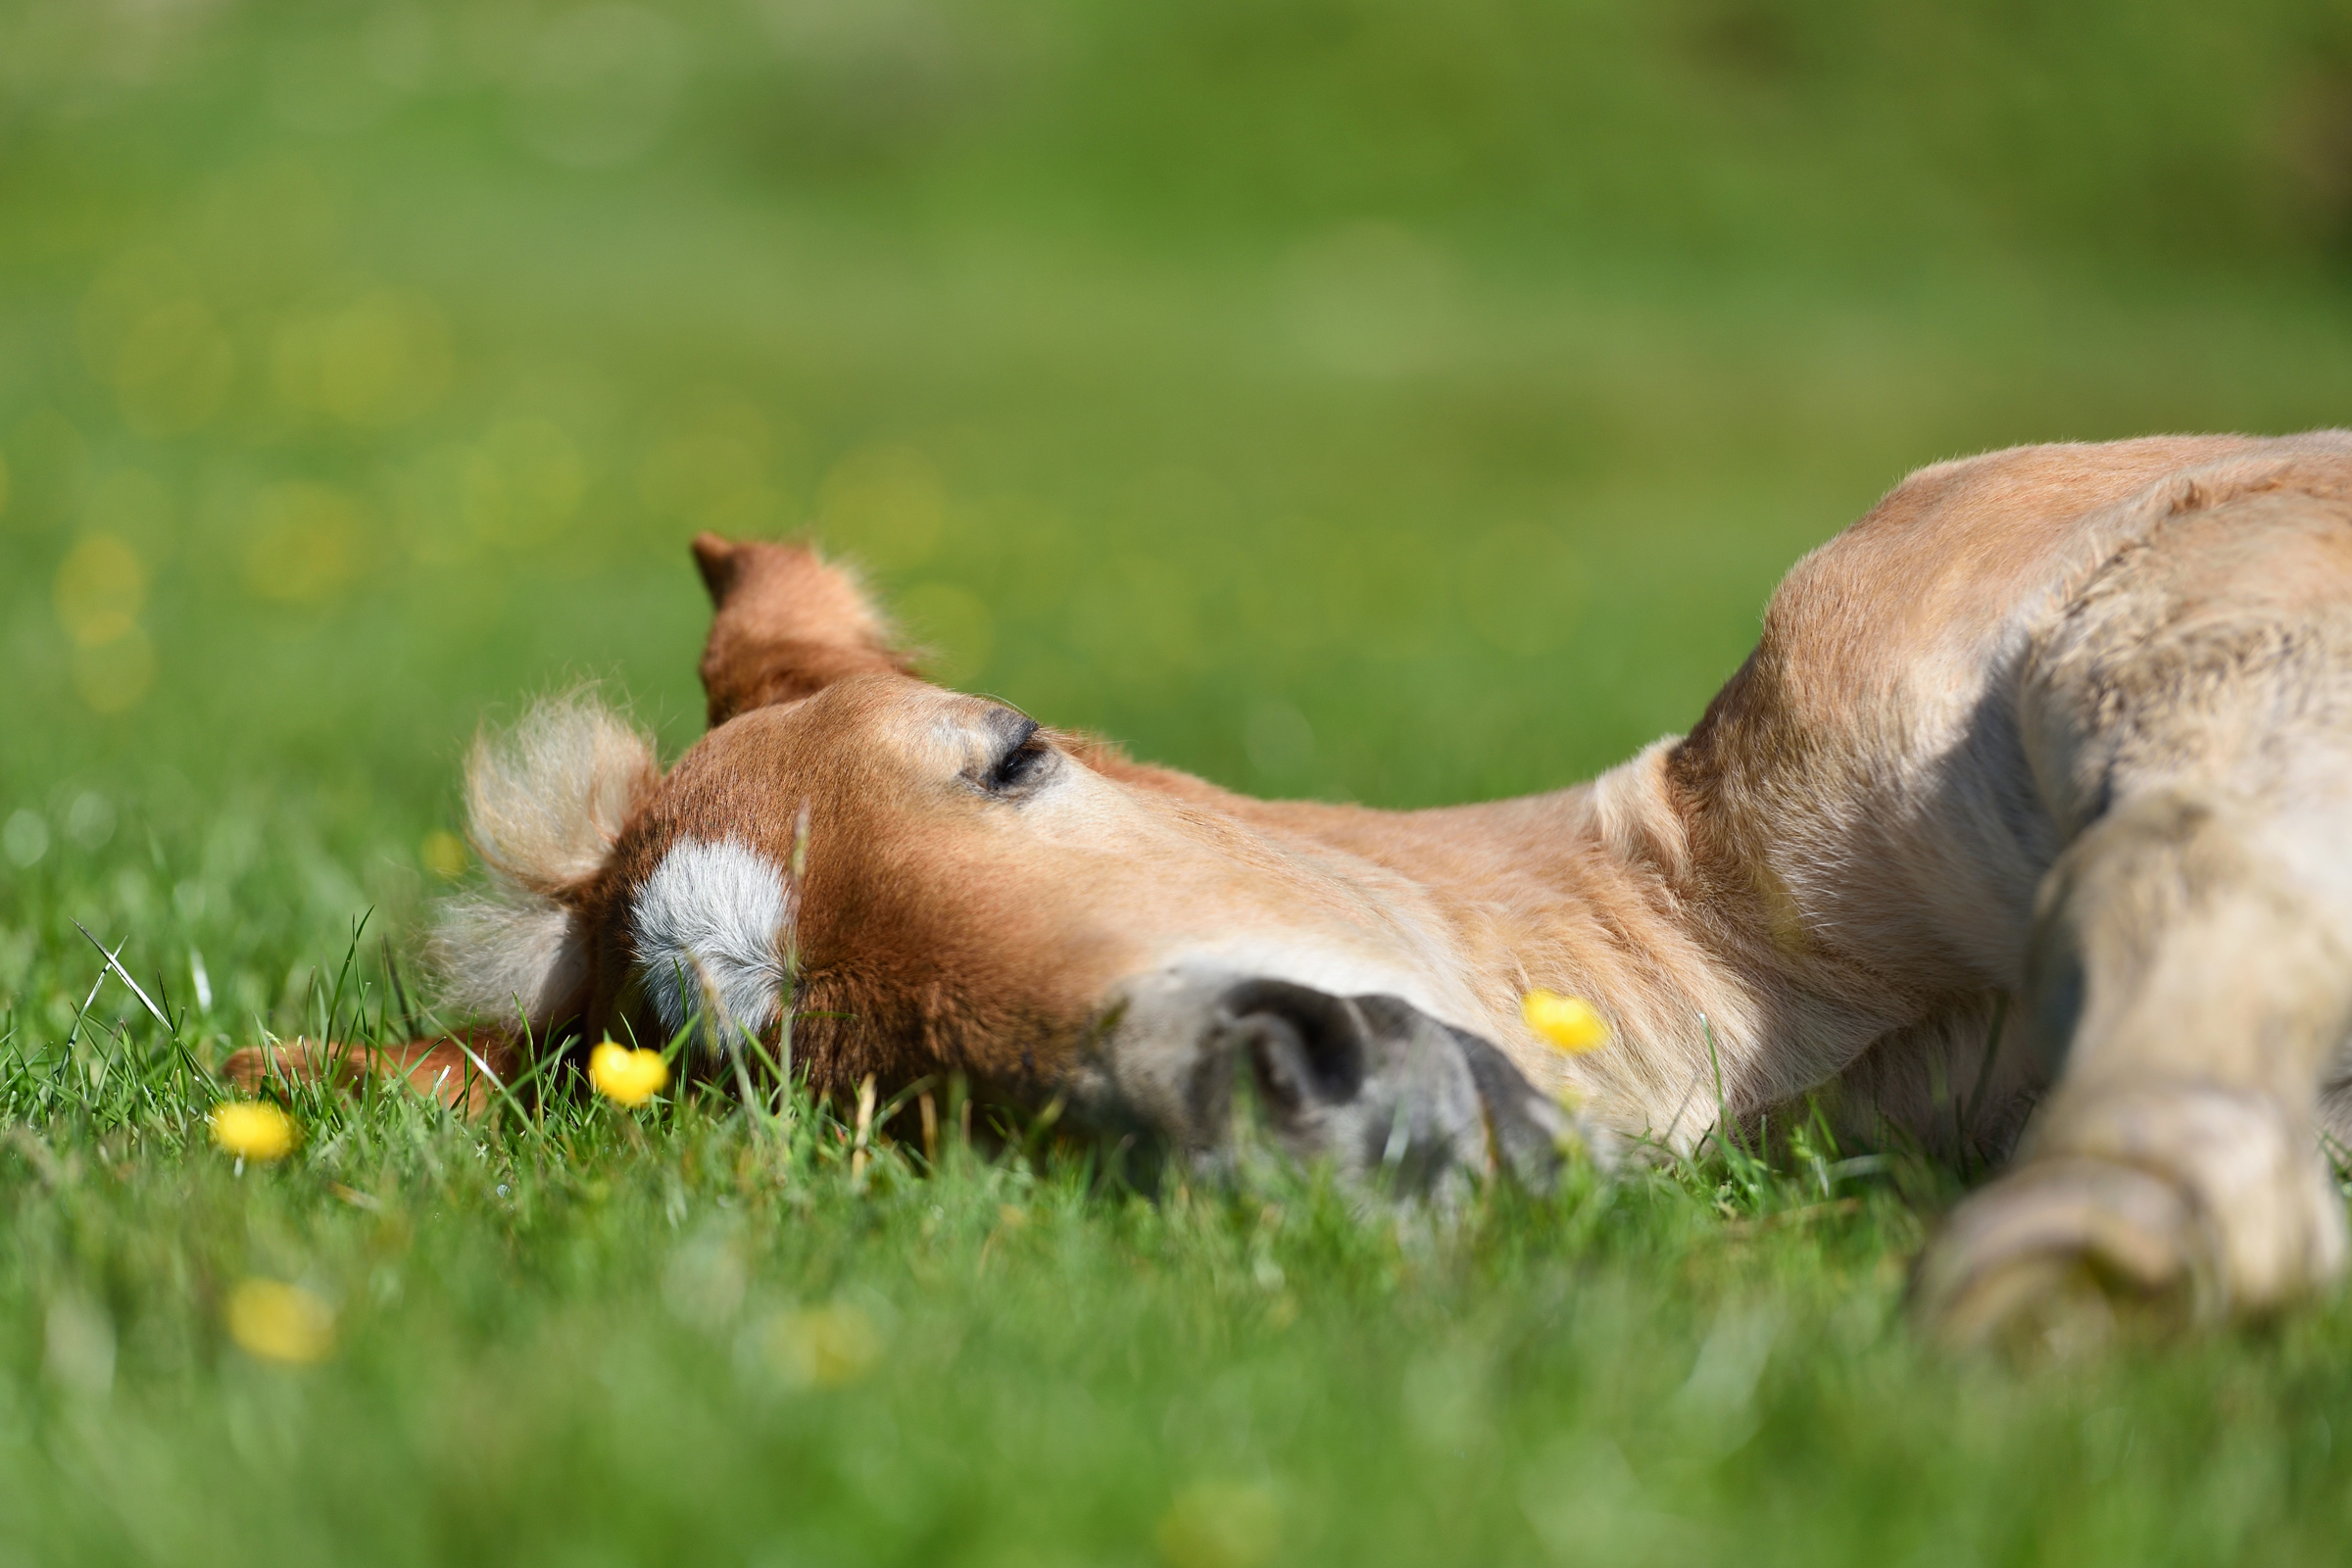 Little Foal Having A Rest In Green Grass With Flowers